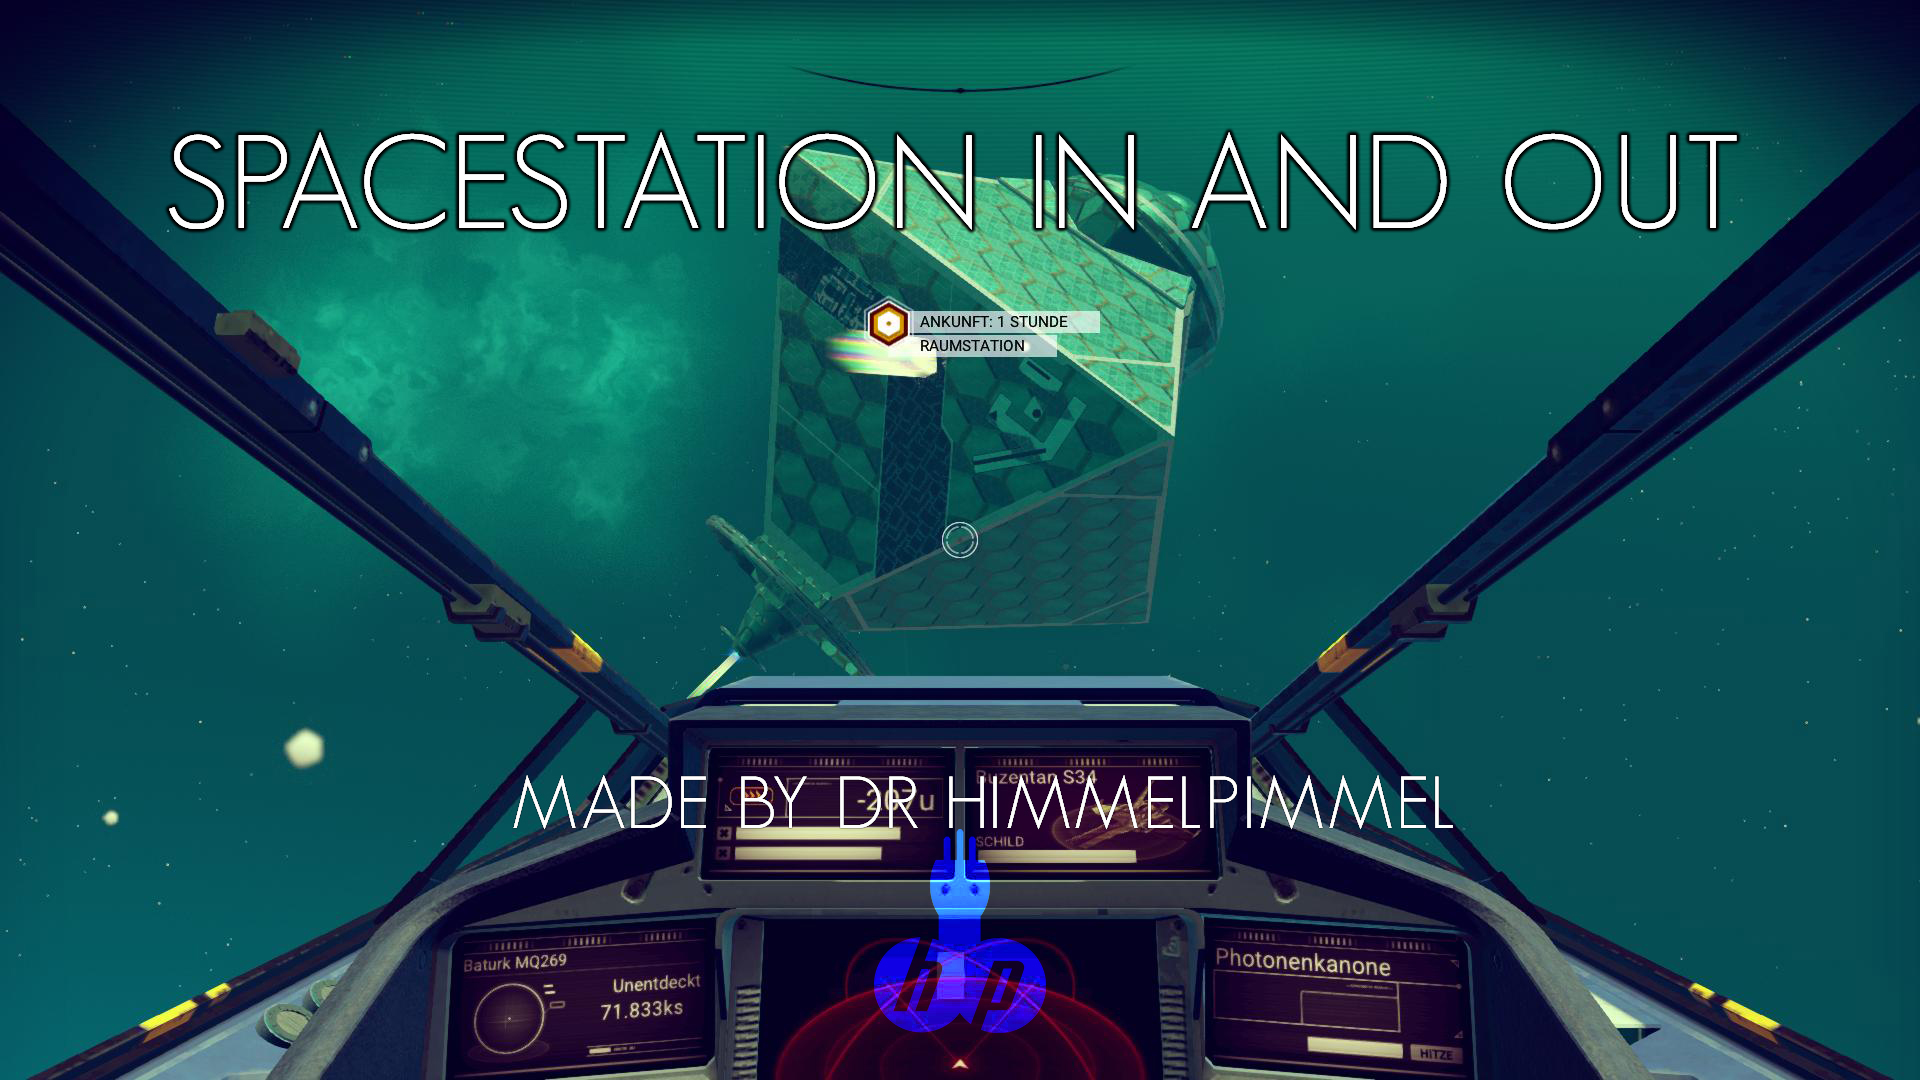 SPACESTATION IN AND OUT HD